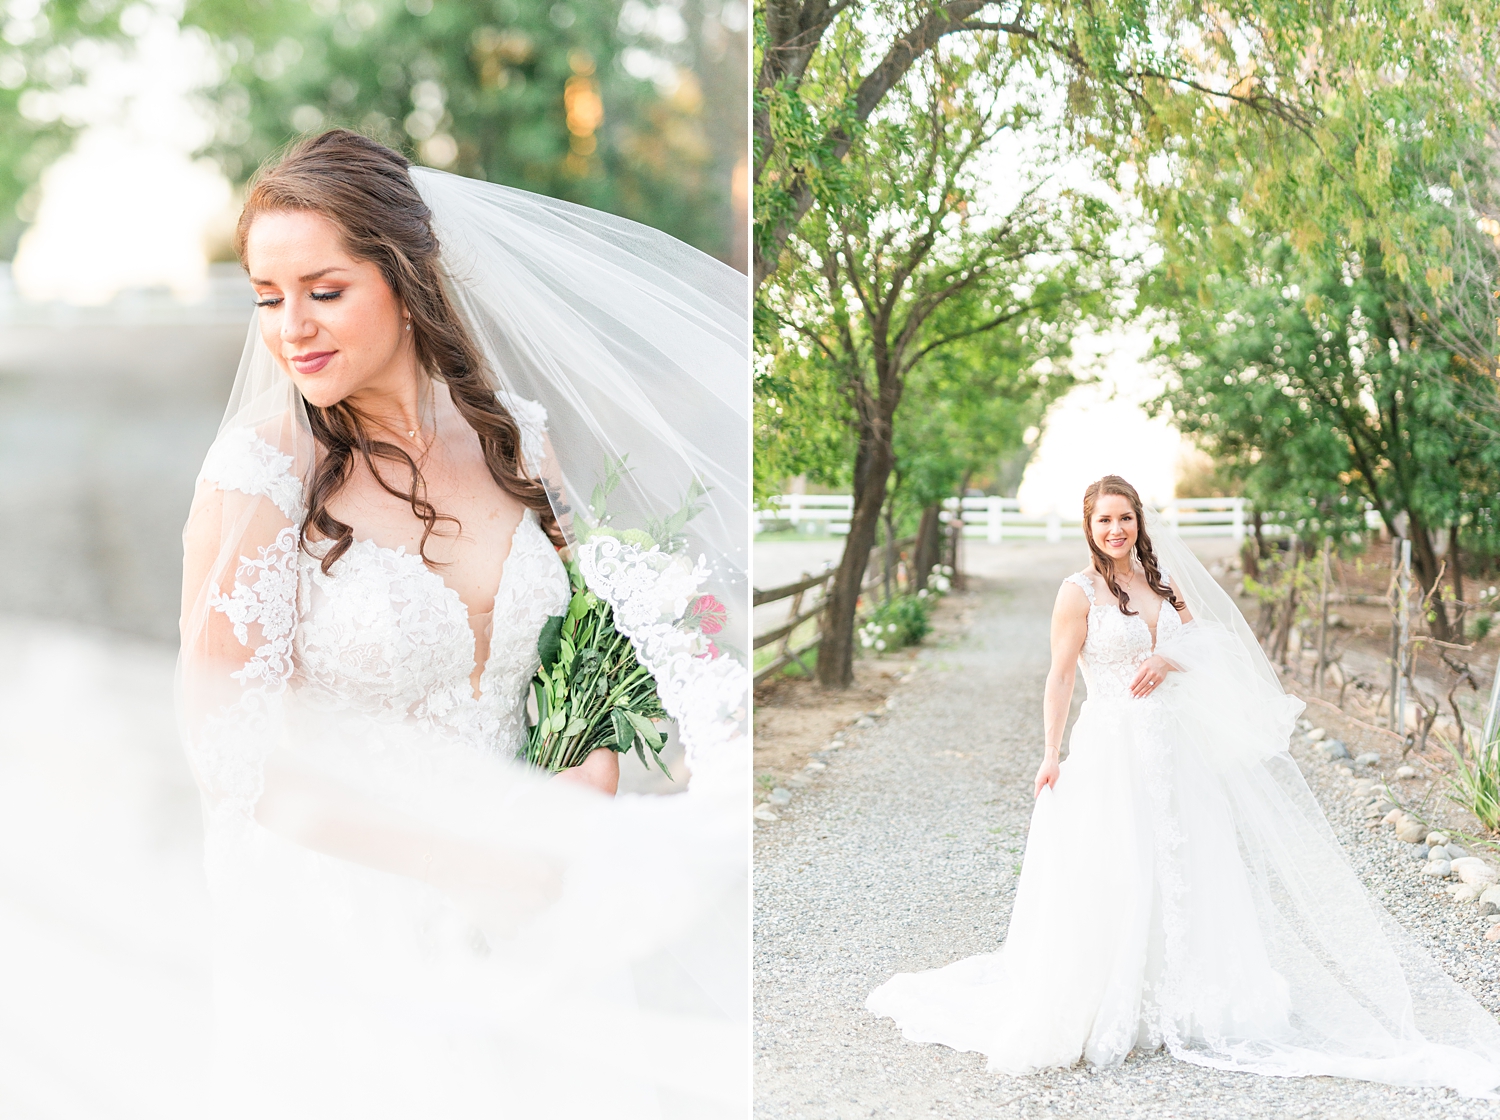 Bridal Session in a winery in temecula from a Temecula Wedding Photographer_0020.jpg